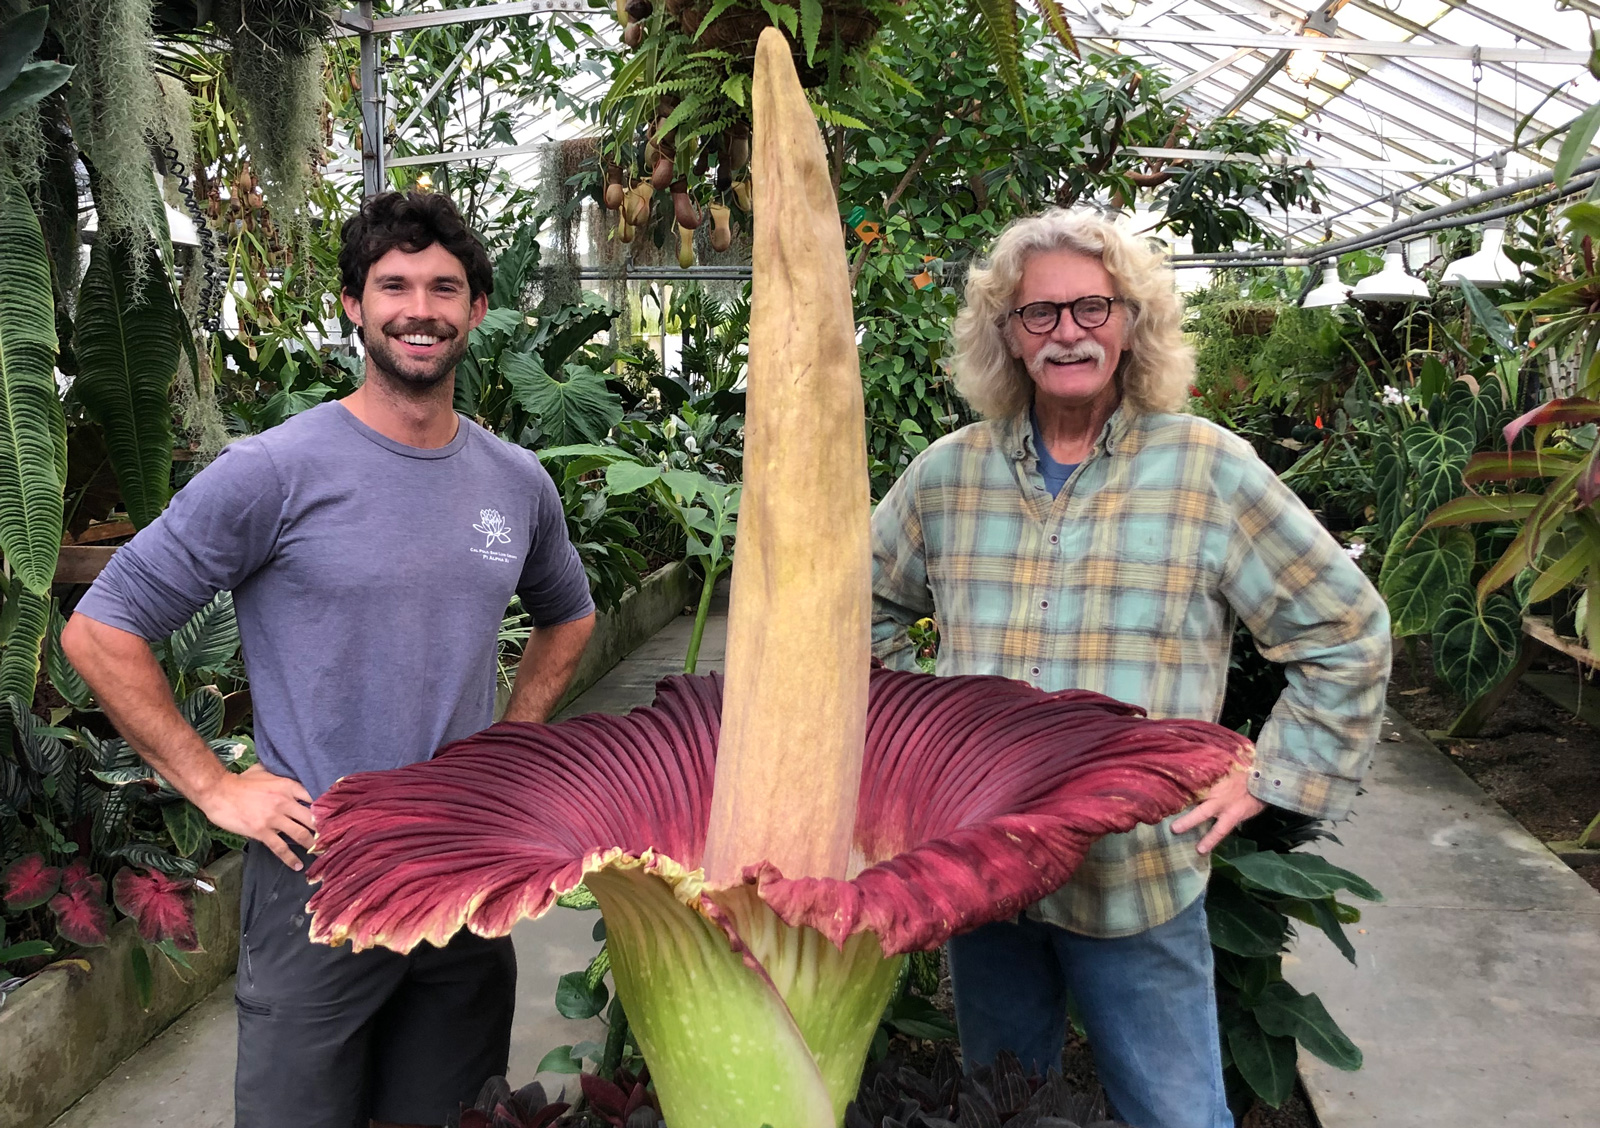 back to back blooms: another corpse flower comes alive for third